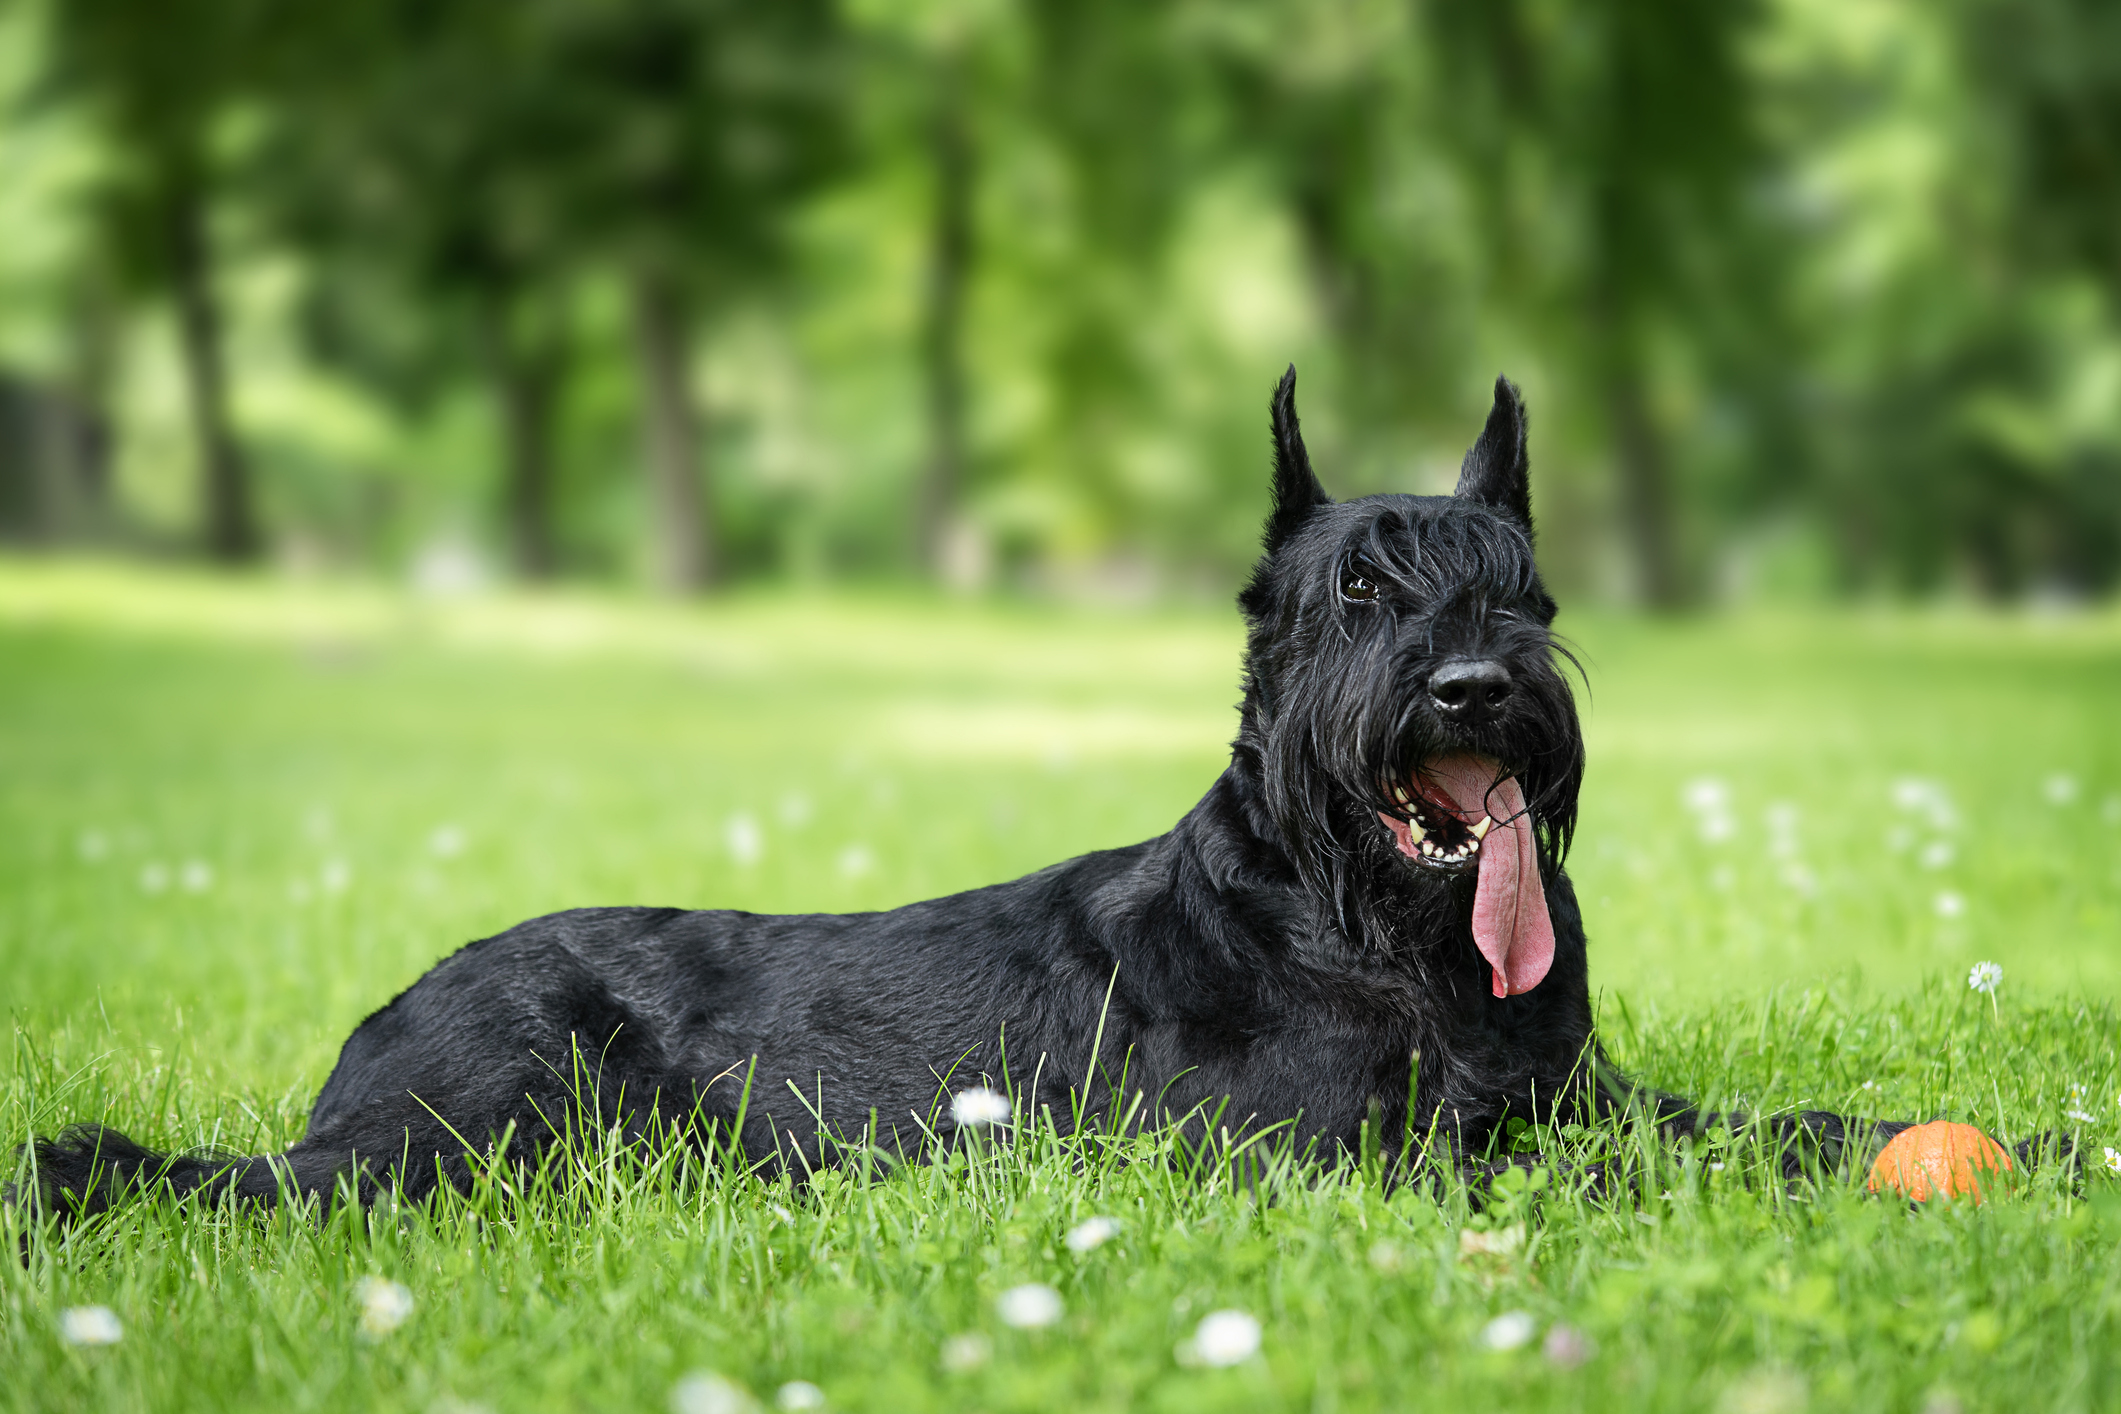 A black Giant Schnauzer in the park.